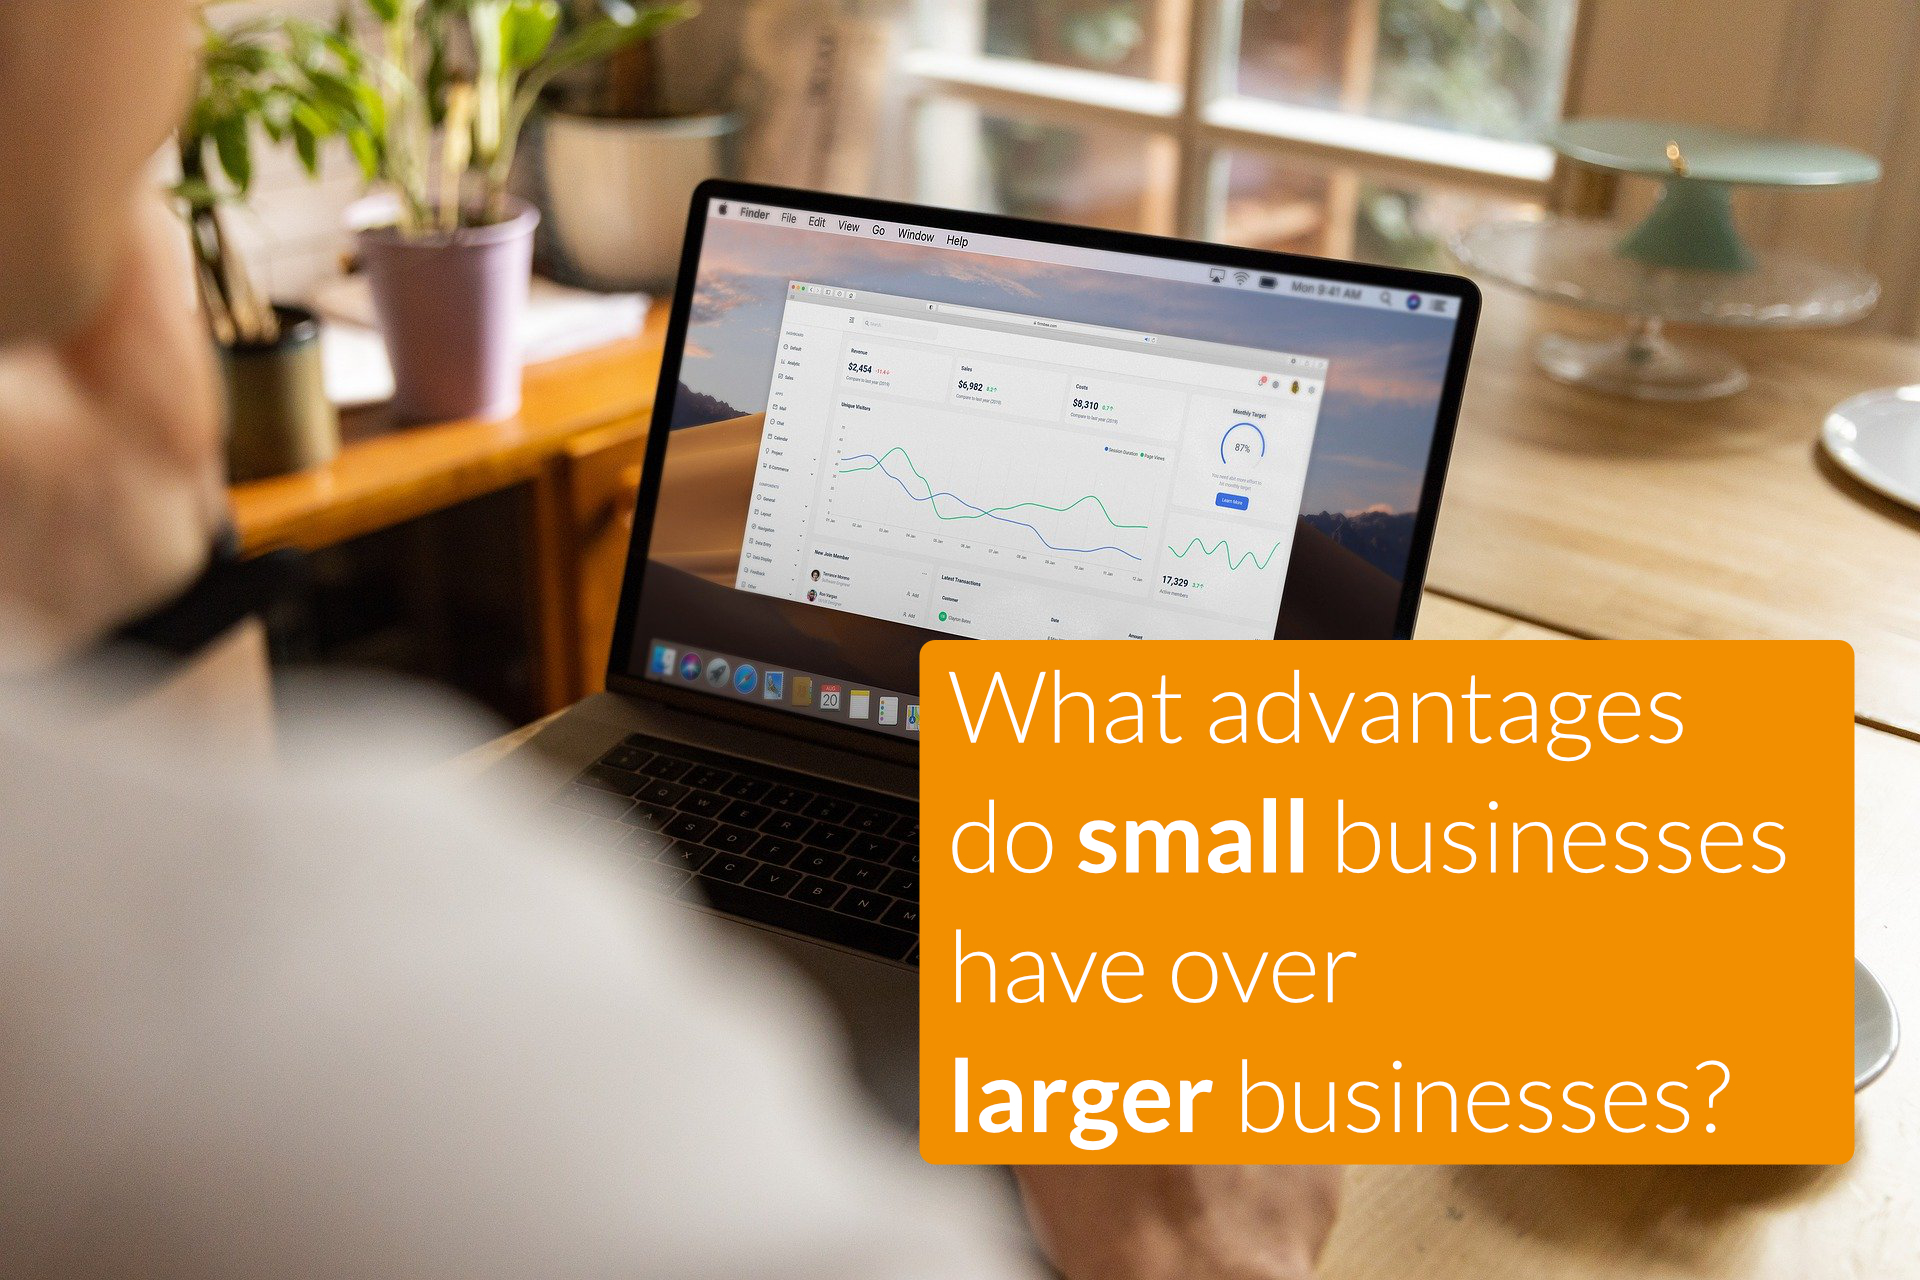 What advantages do small businesses have over larger businesses?